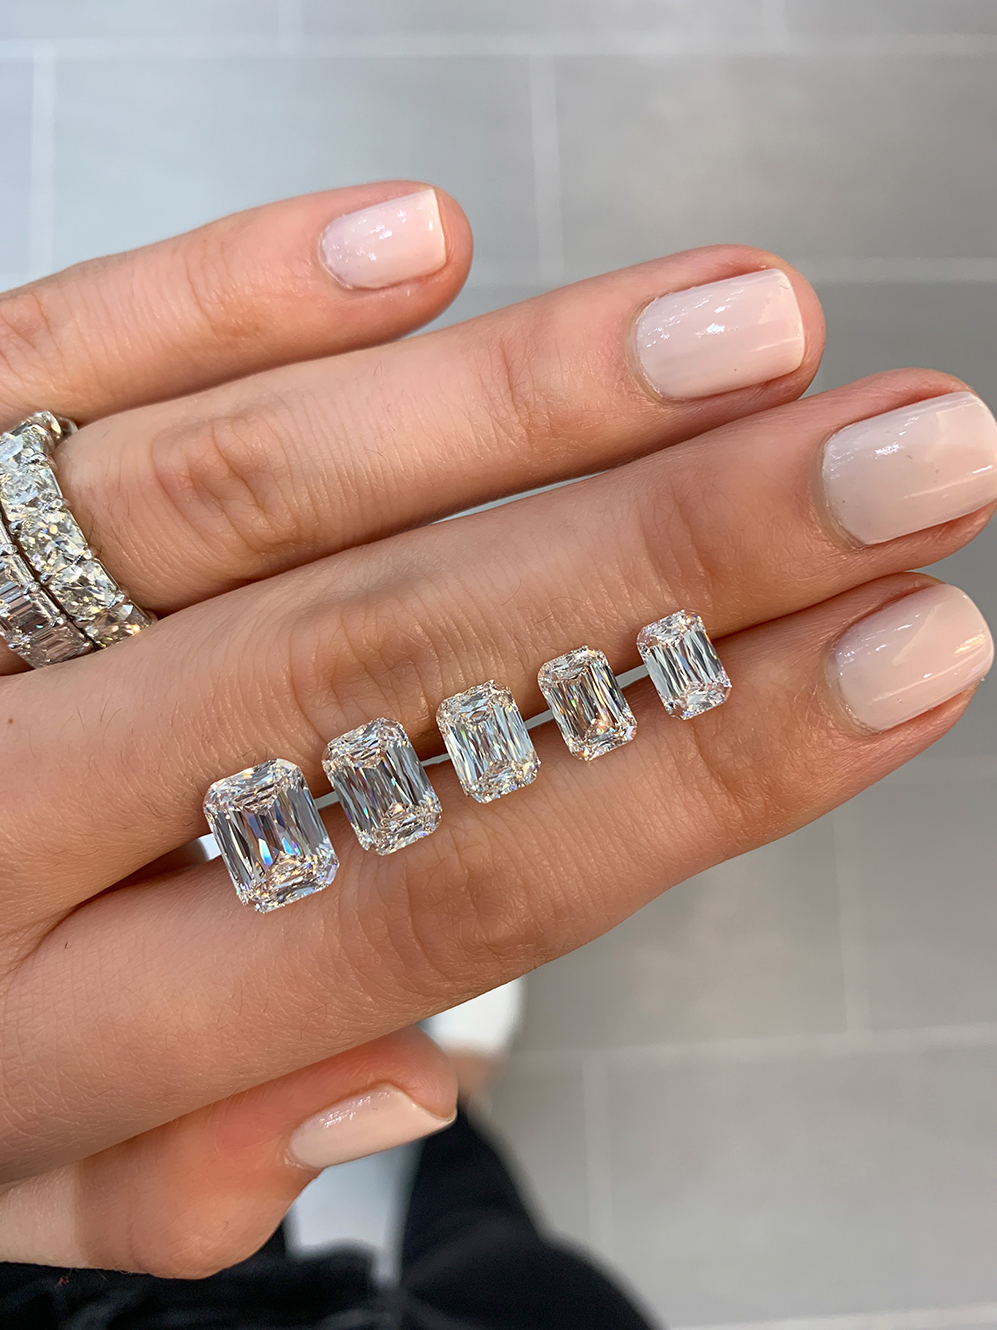 Top 5 Engagement Ring Trend Predictions 